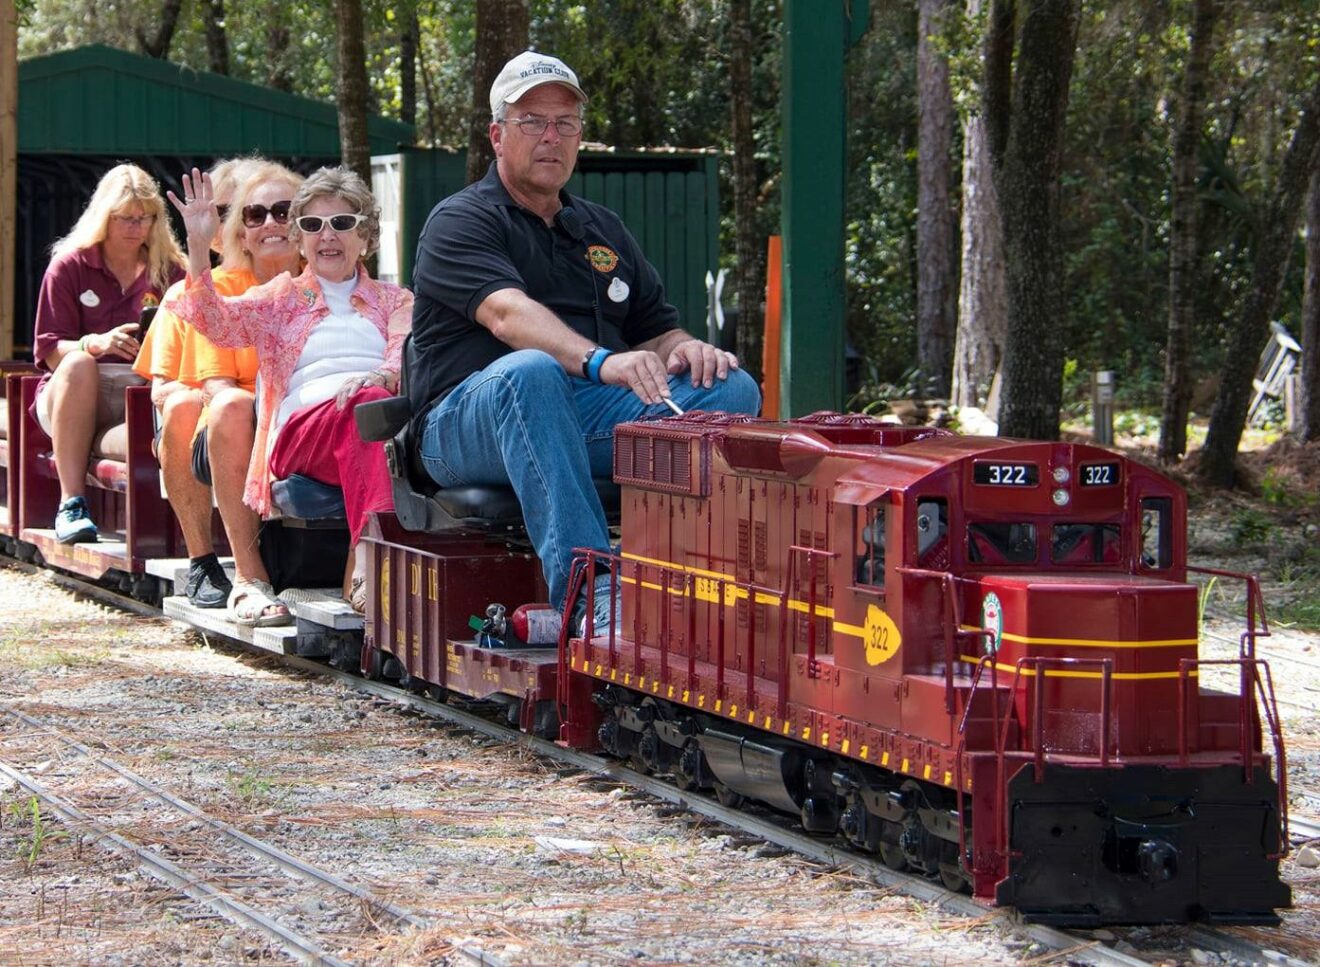 Central Pasco and Gulf Railroad brings Joy to All Ages in Crews Lake Wilderness Park